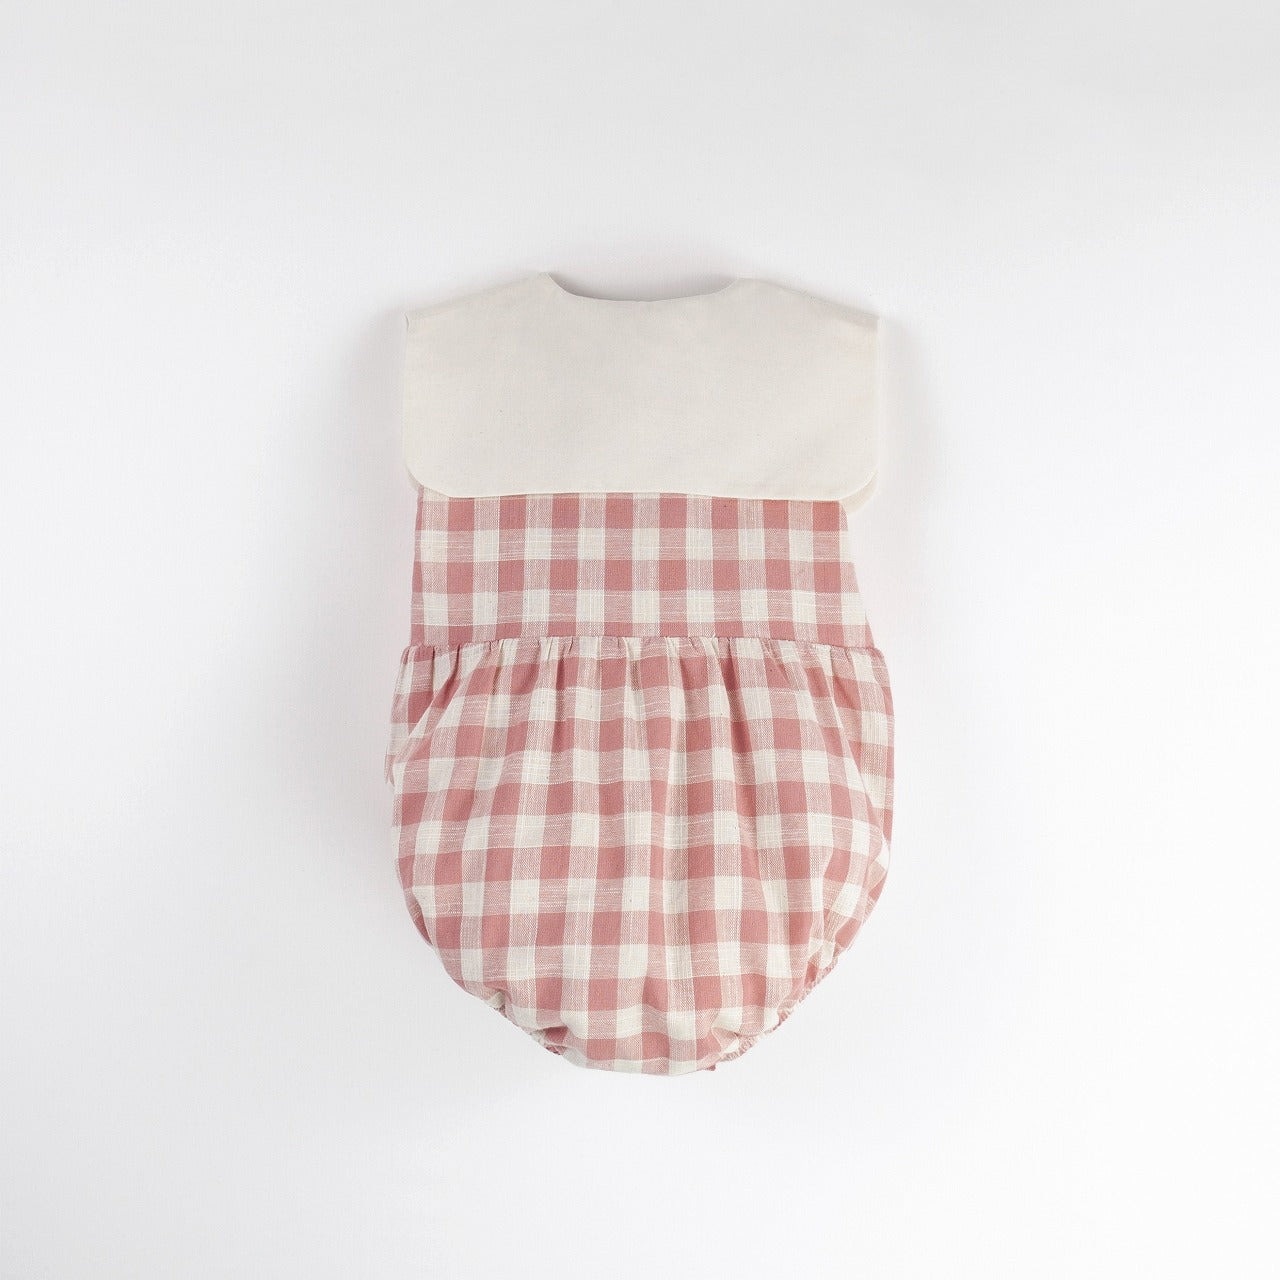 【Popelin】【30%OFF】Pink check romper suit with bib collar ロンパース 9/12m,12/18m  | Coucoubebe/ククベベ